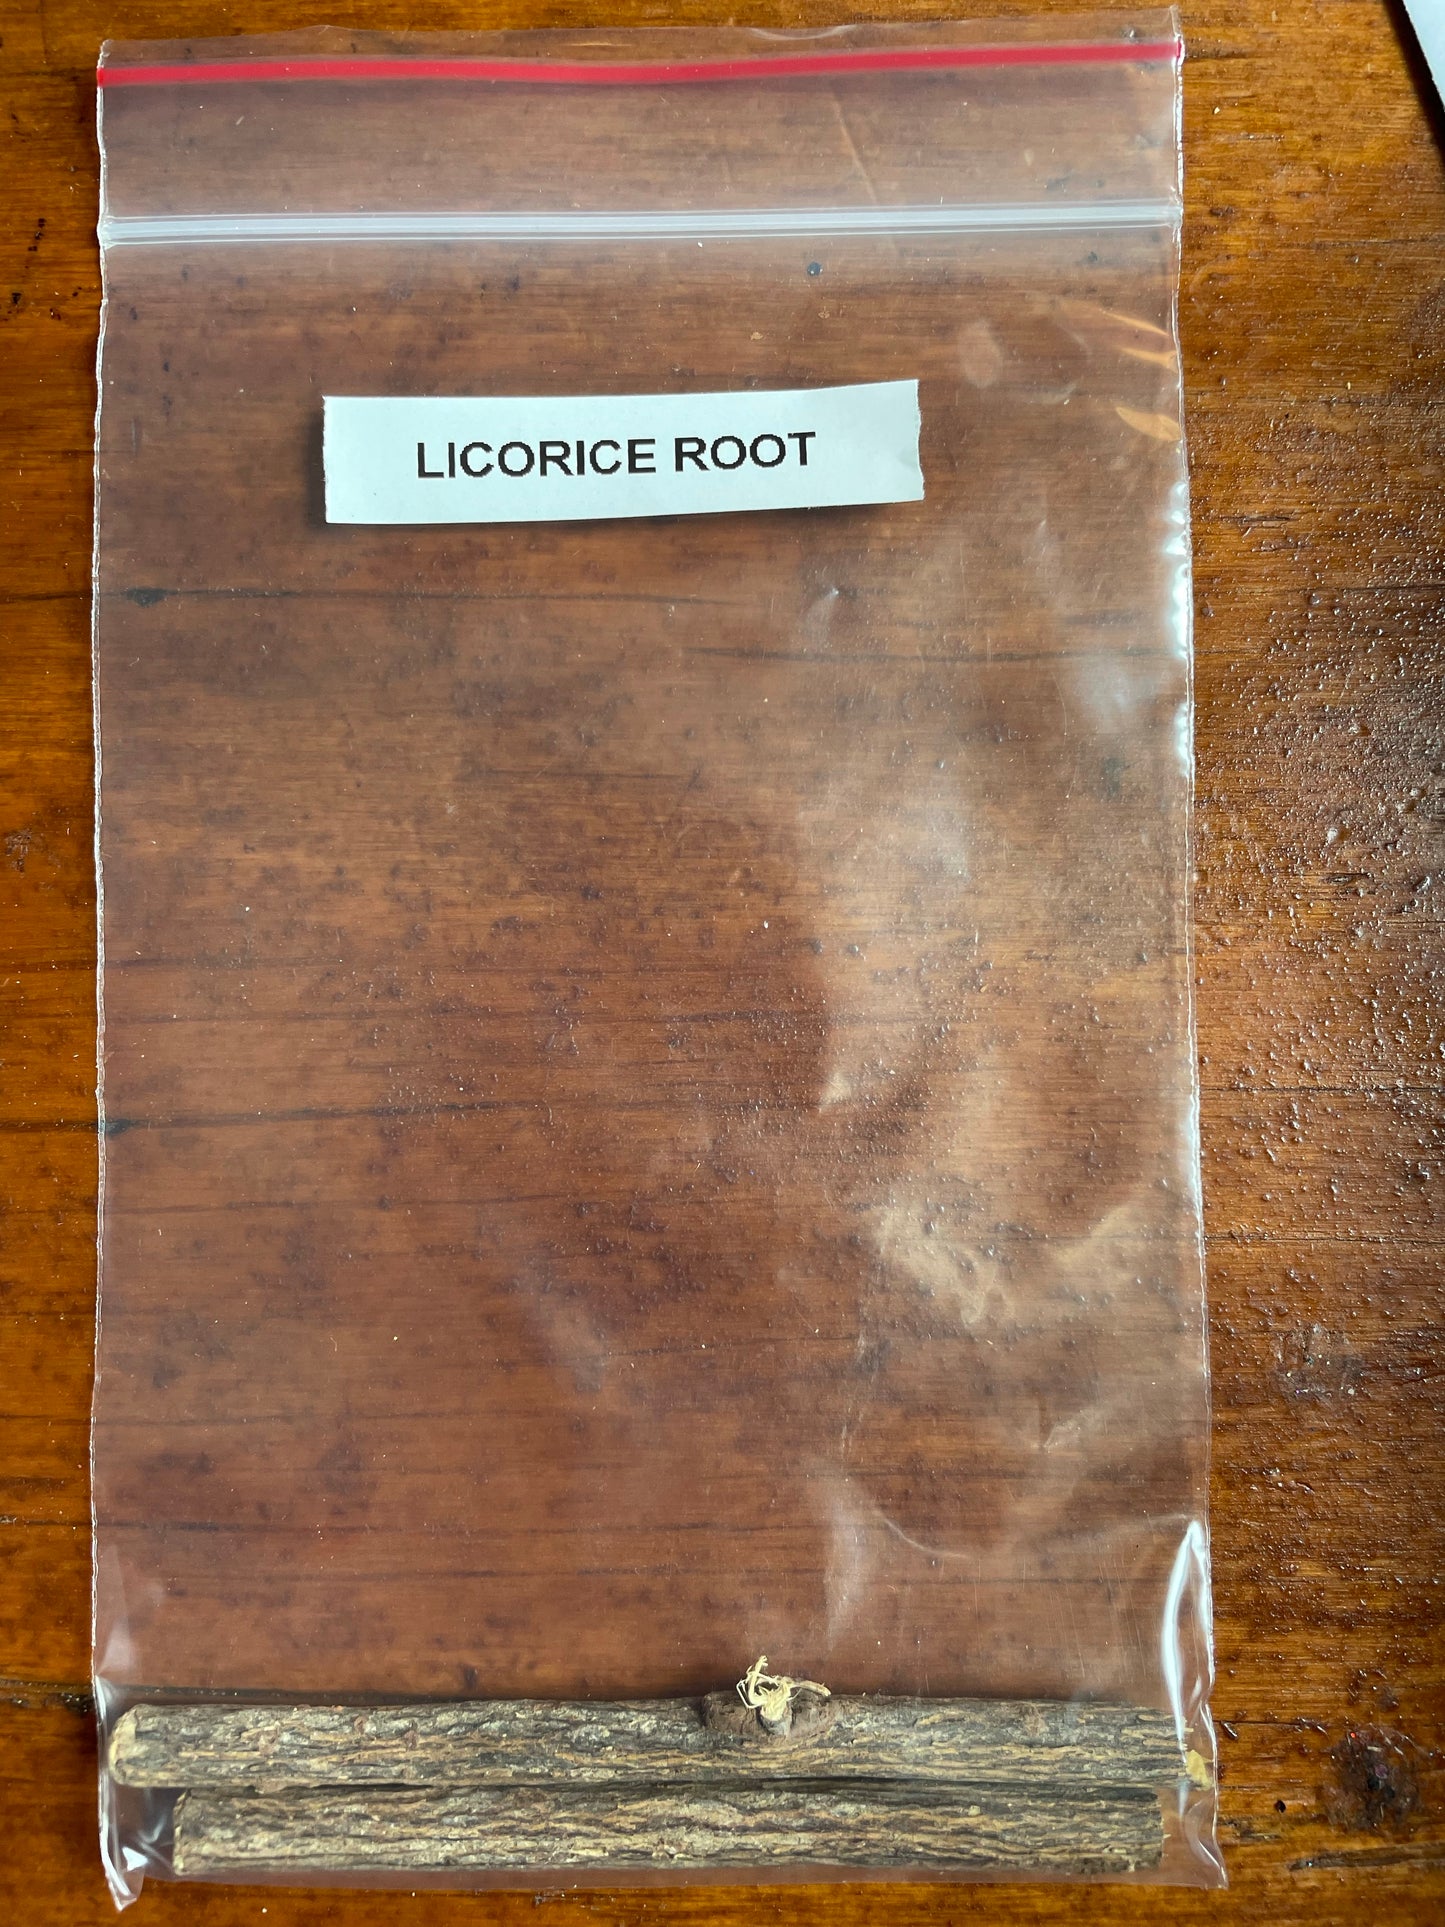 Licorice Root per ounce